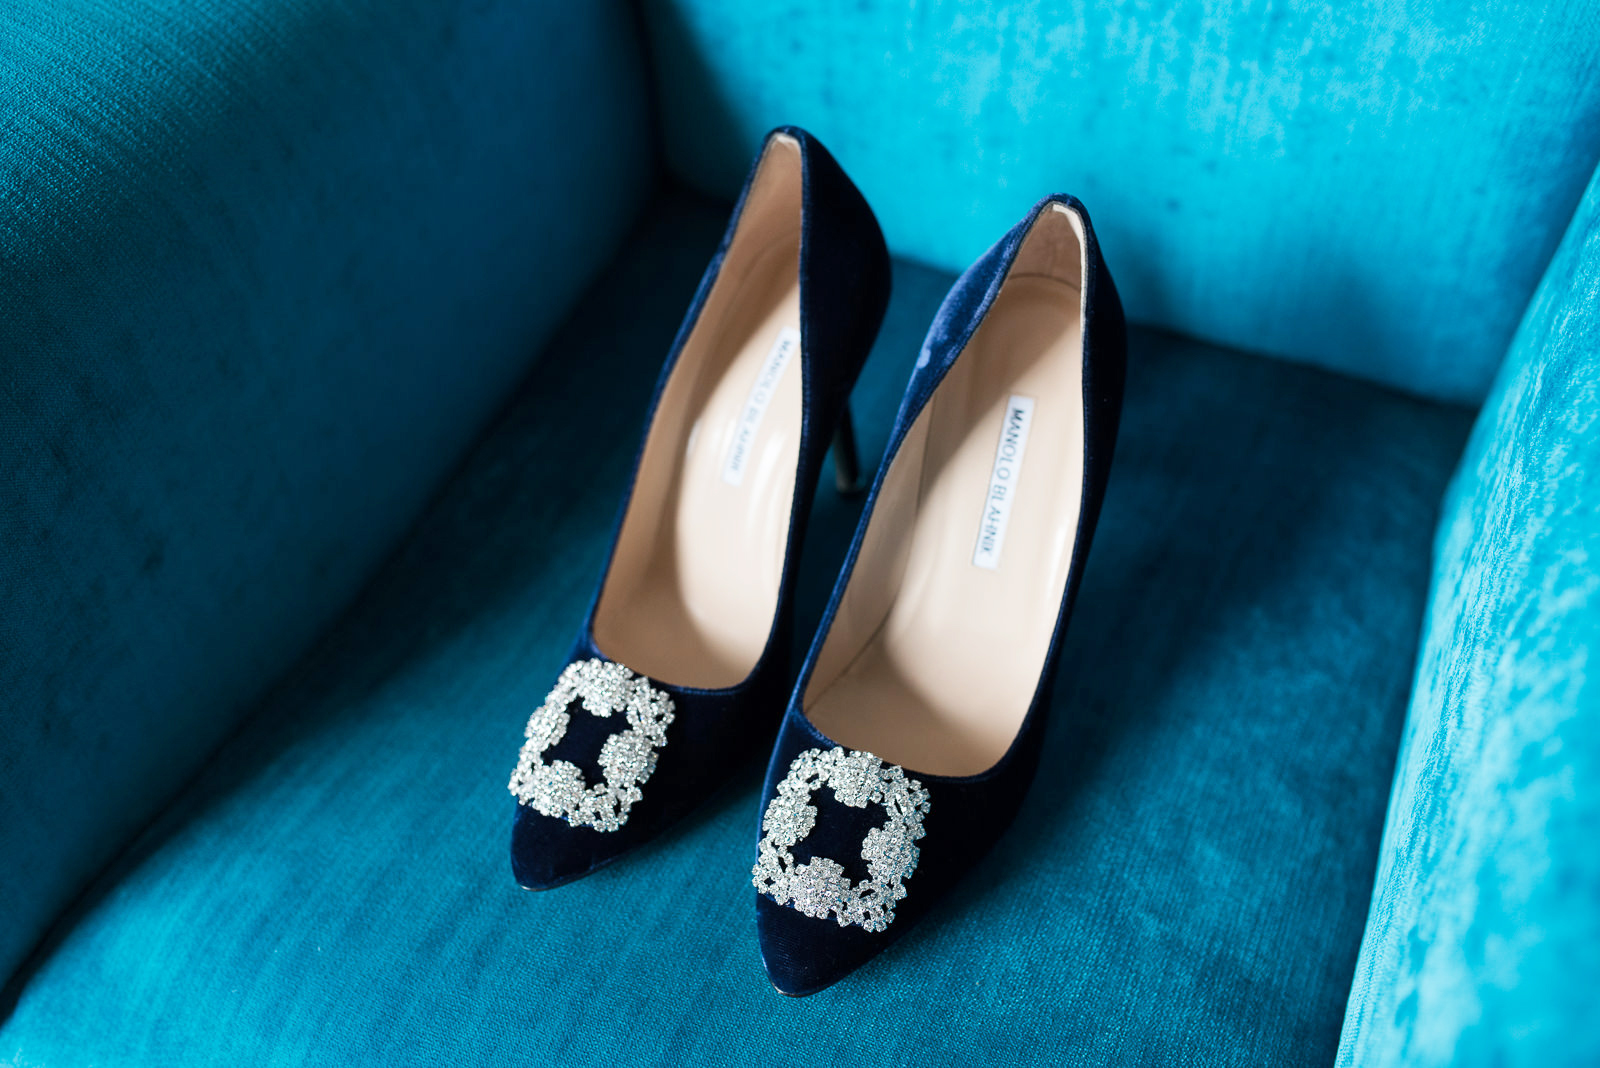 Manolo Bridal shoes in blue